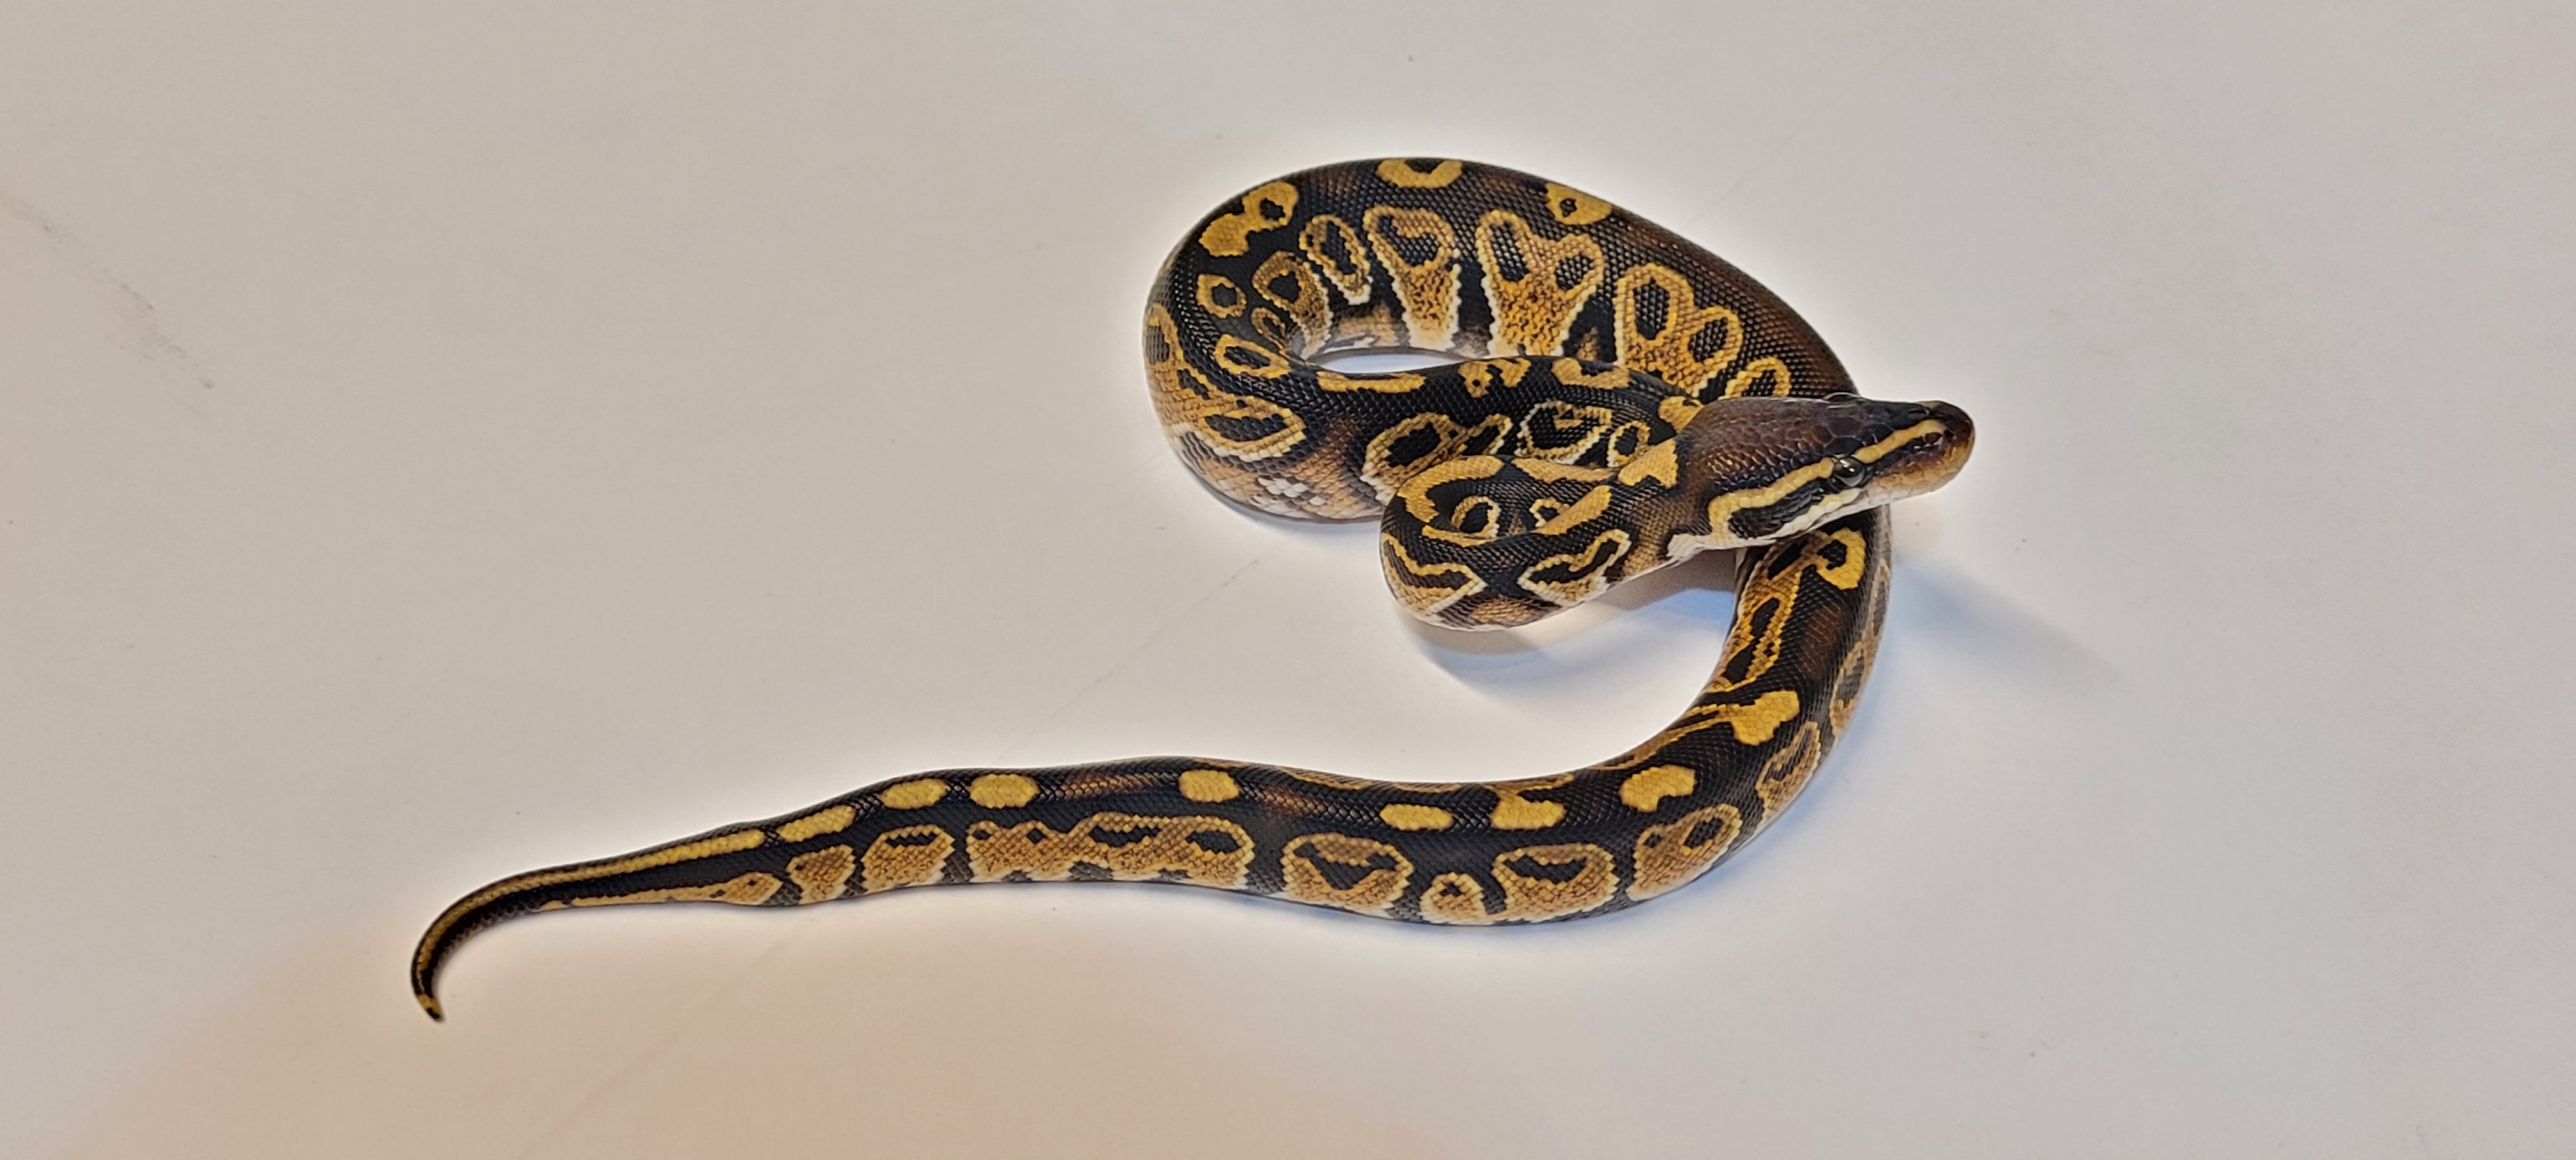 Trick Male Ball Python by DnKreptiles